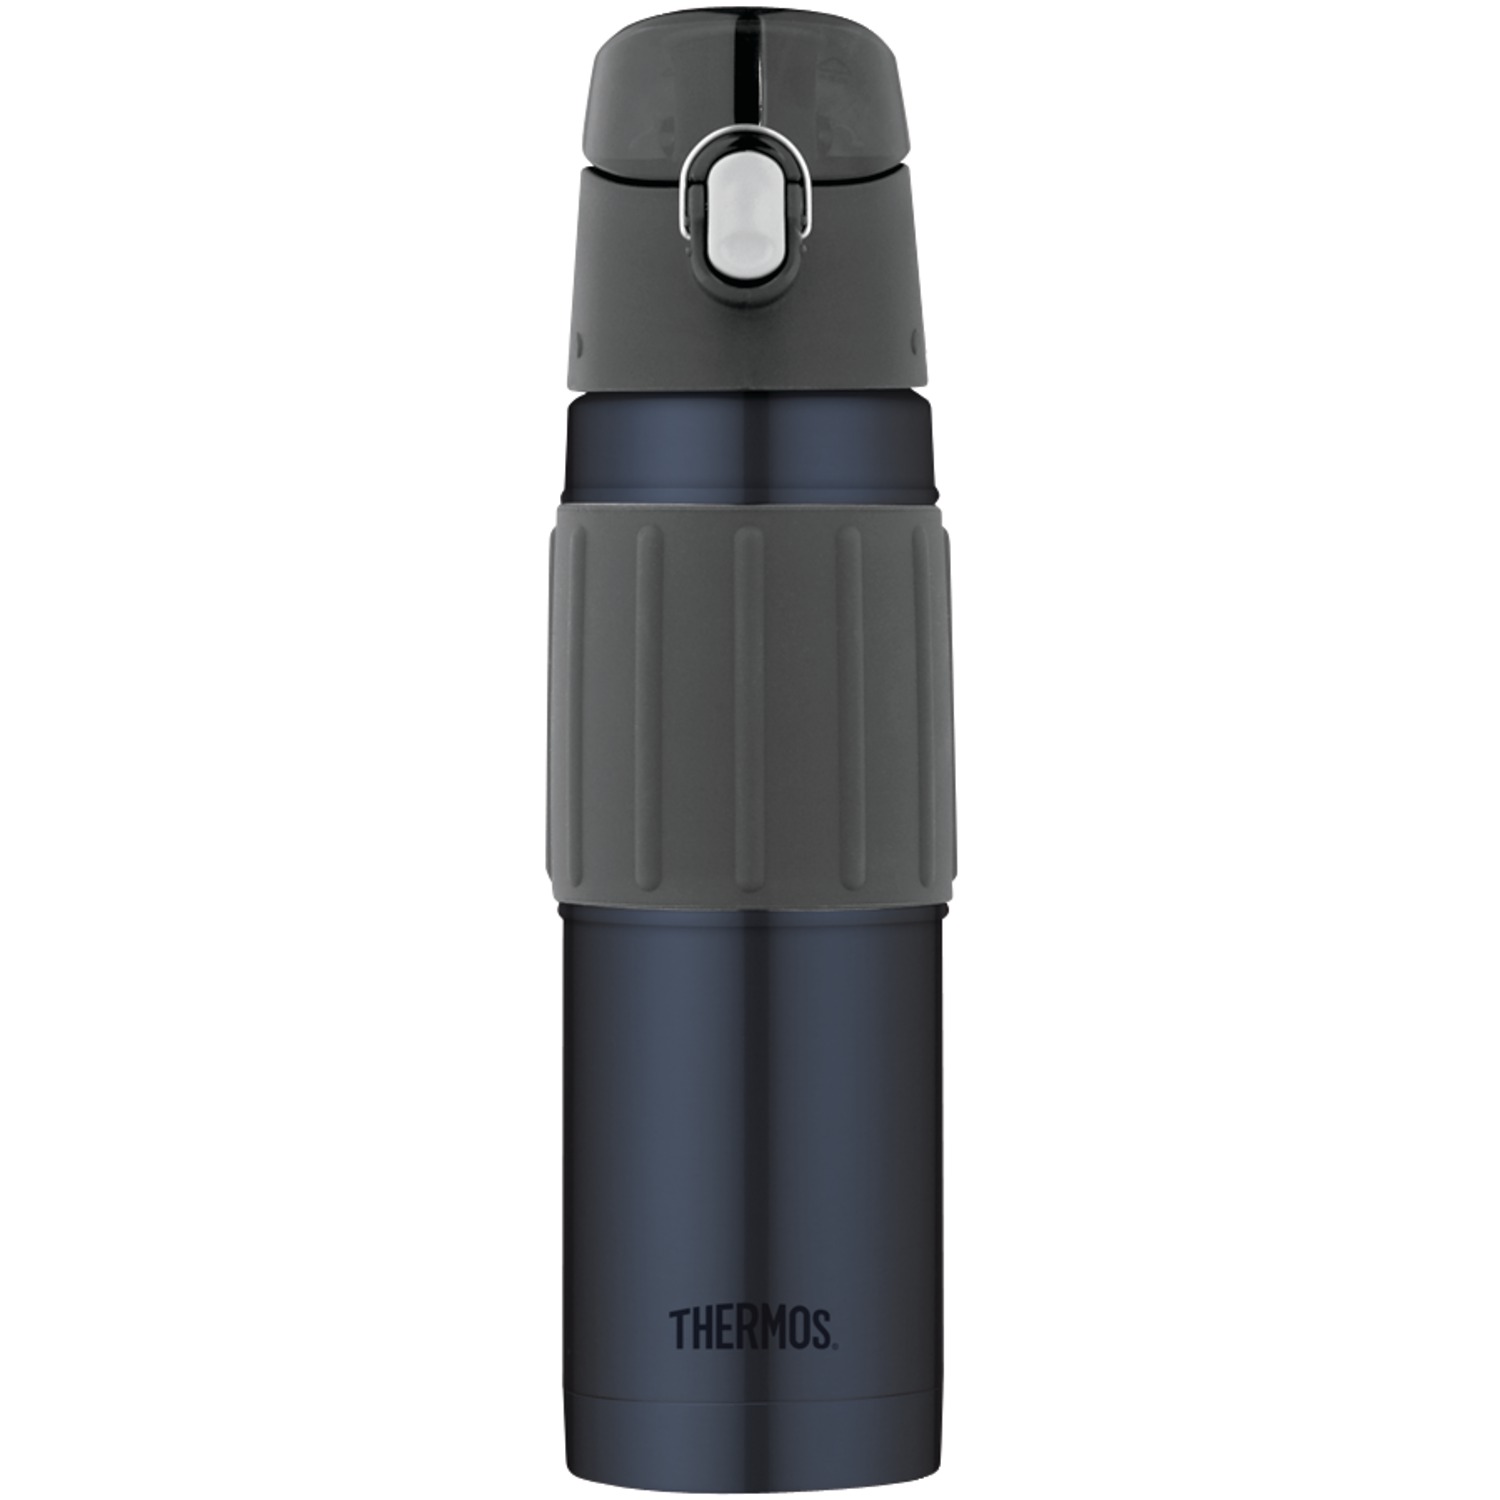 Thermos 2465MBTRI6 18-ounce Stainless Steel Hydration Bottle - image 1 of 2